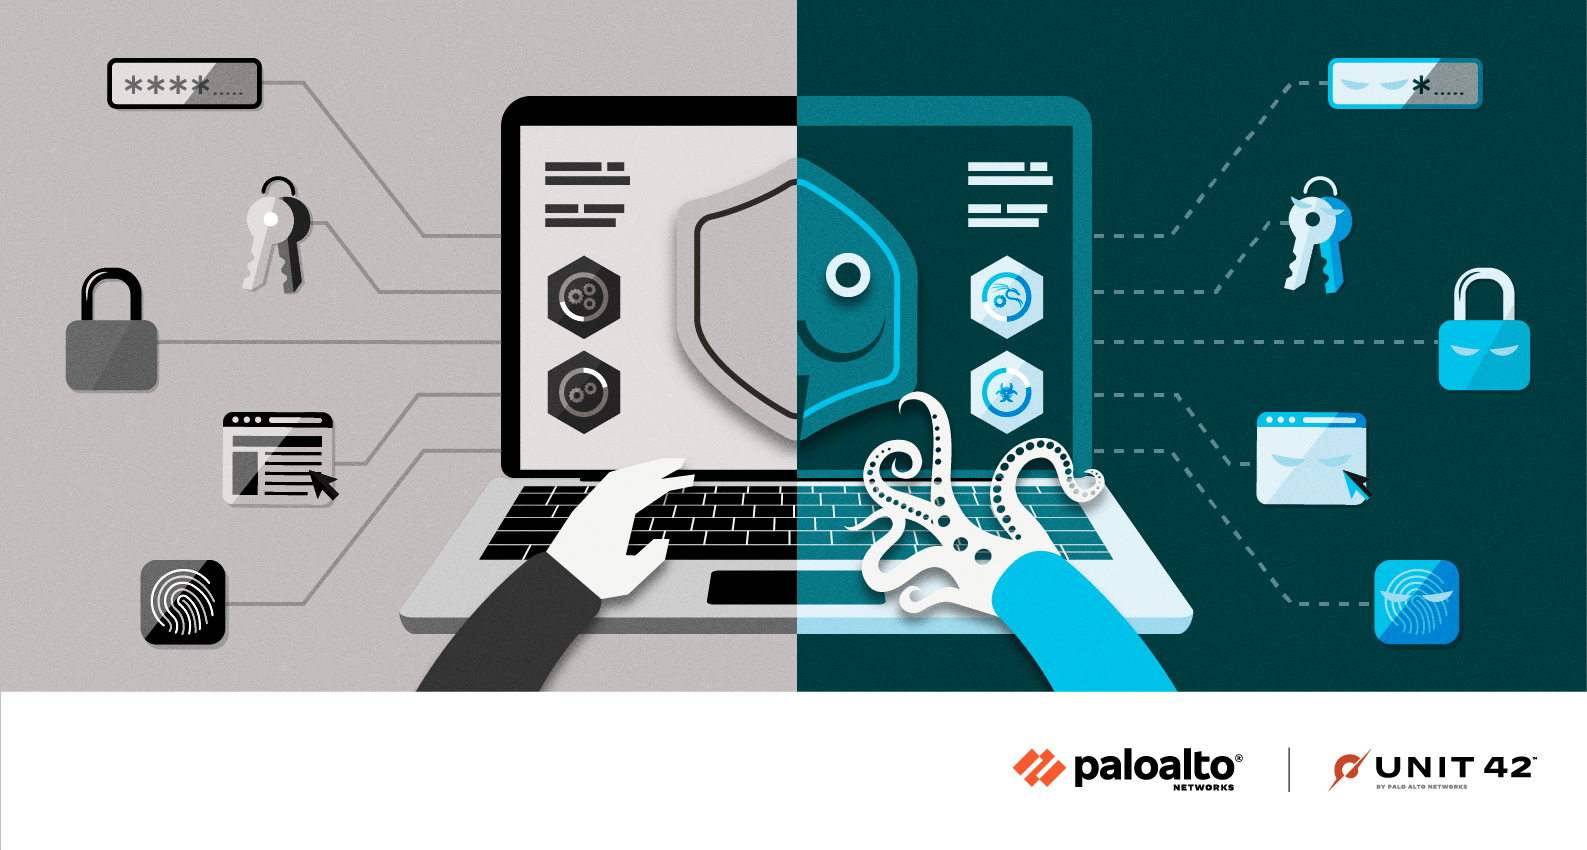 A pictorial representation of Cobalt Strike attacks using Malleable C2 profiles found in the wild, as well as the Palo Alto Networks and Unit 42 logos.